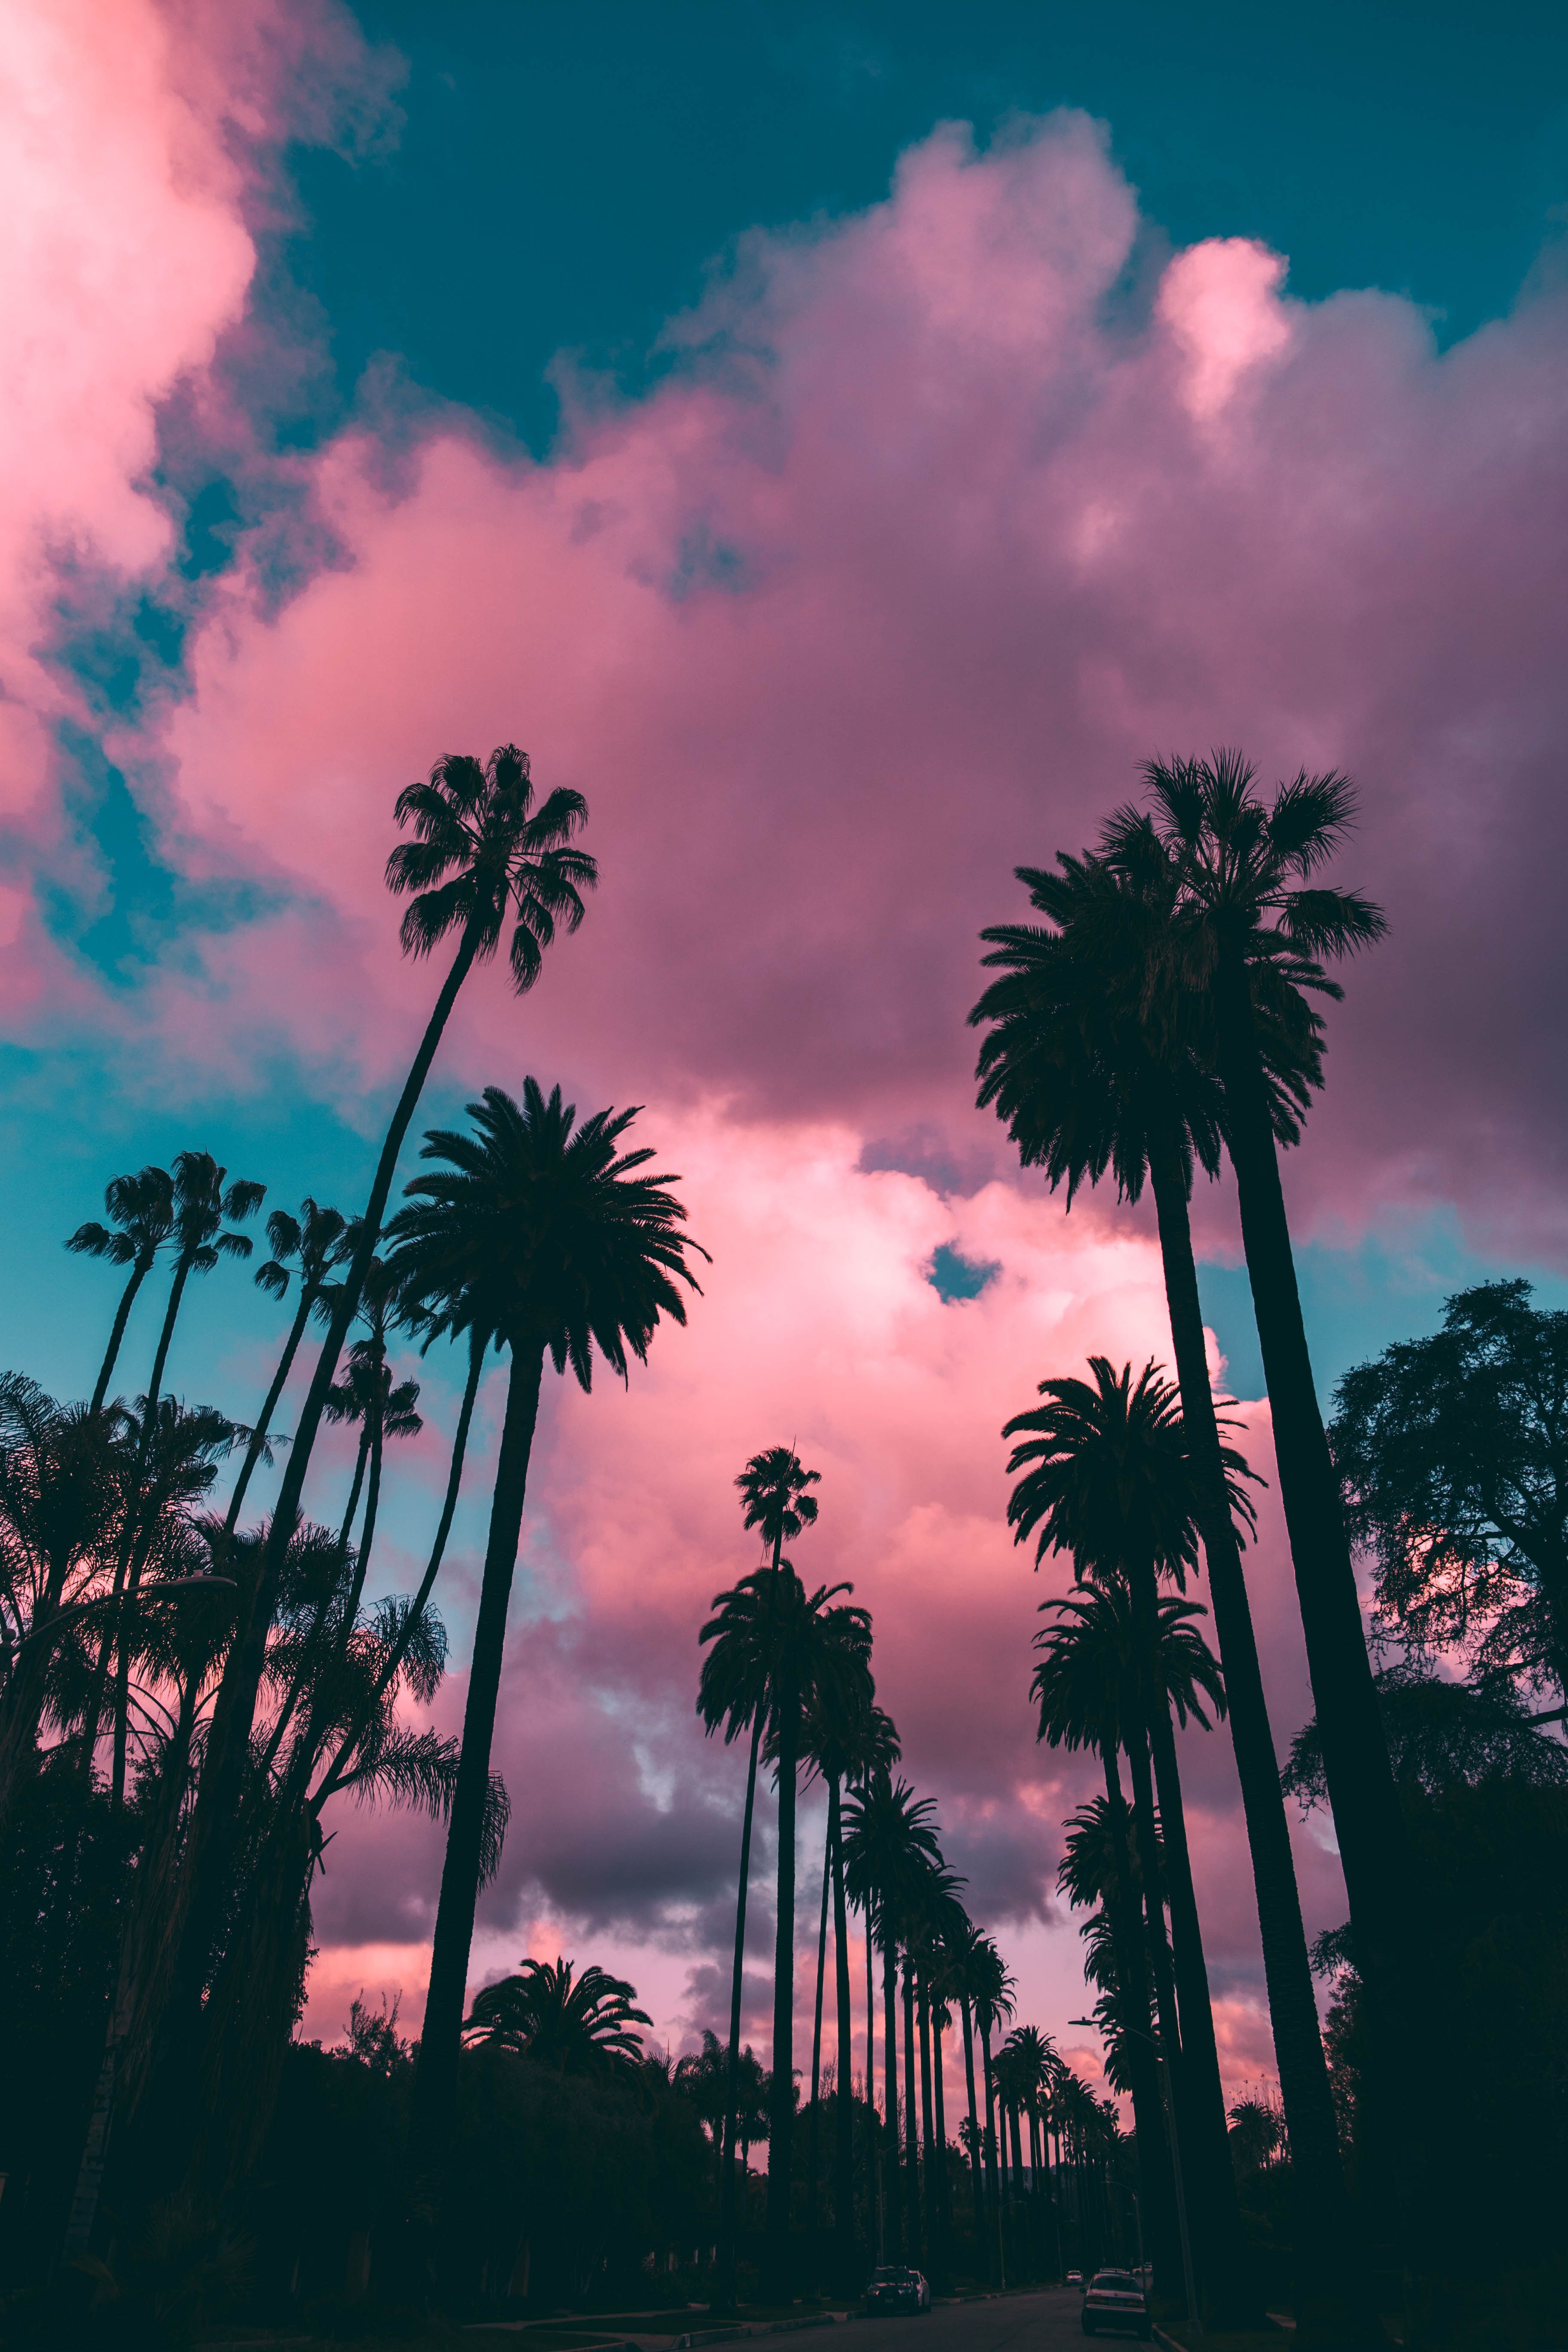 Pink Sunset Los Angeles Scenery Palm Trees Turquoise Sky. Sunset